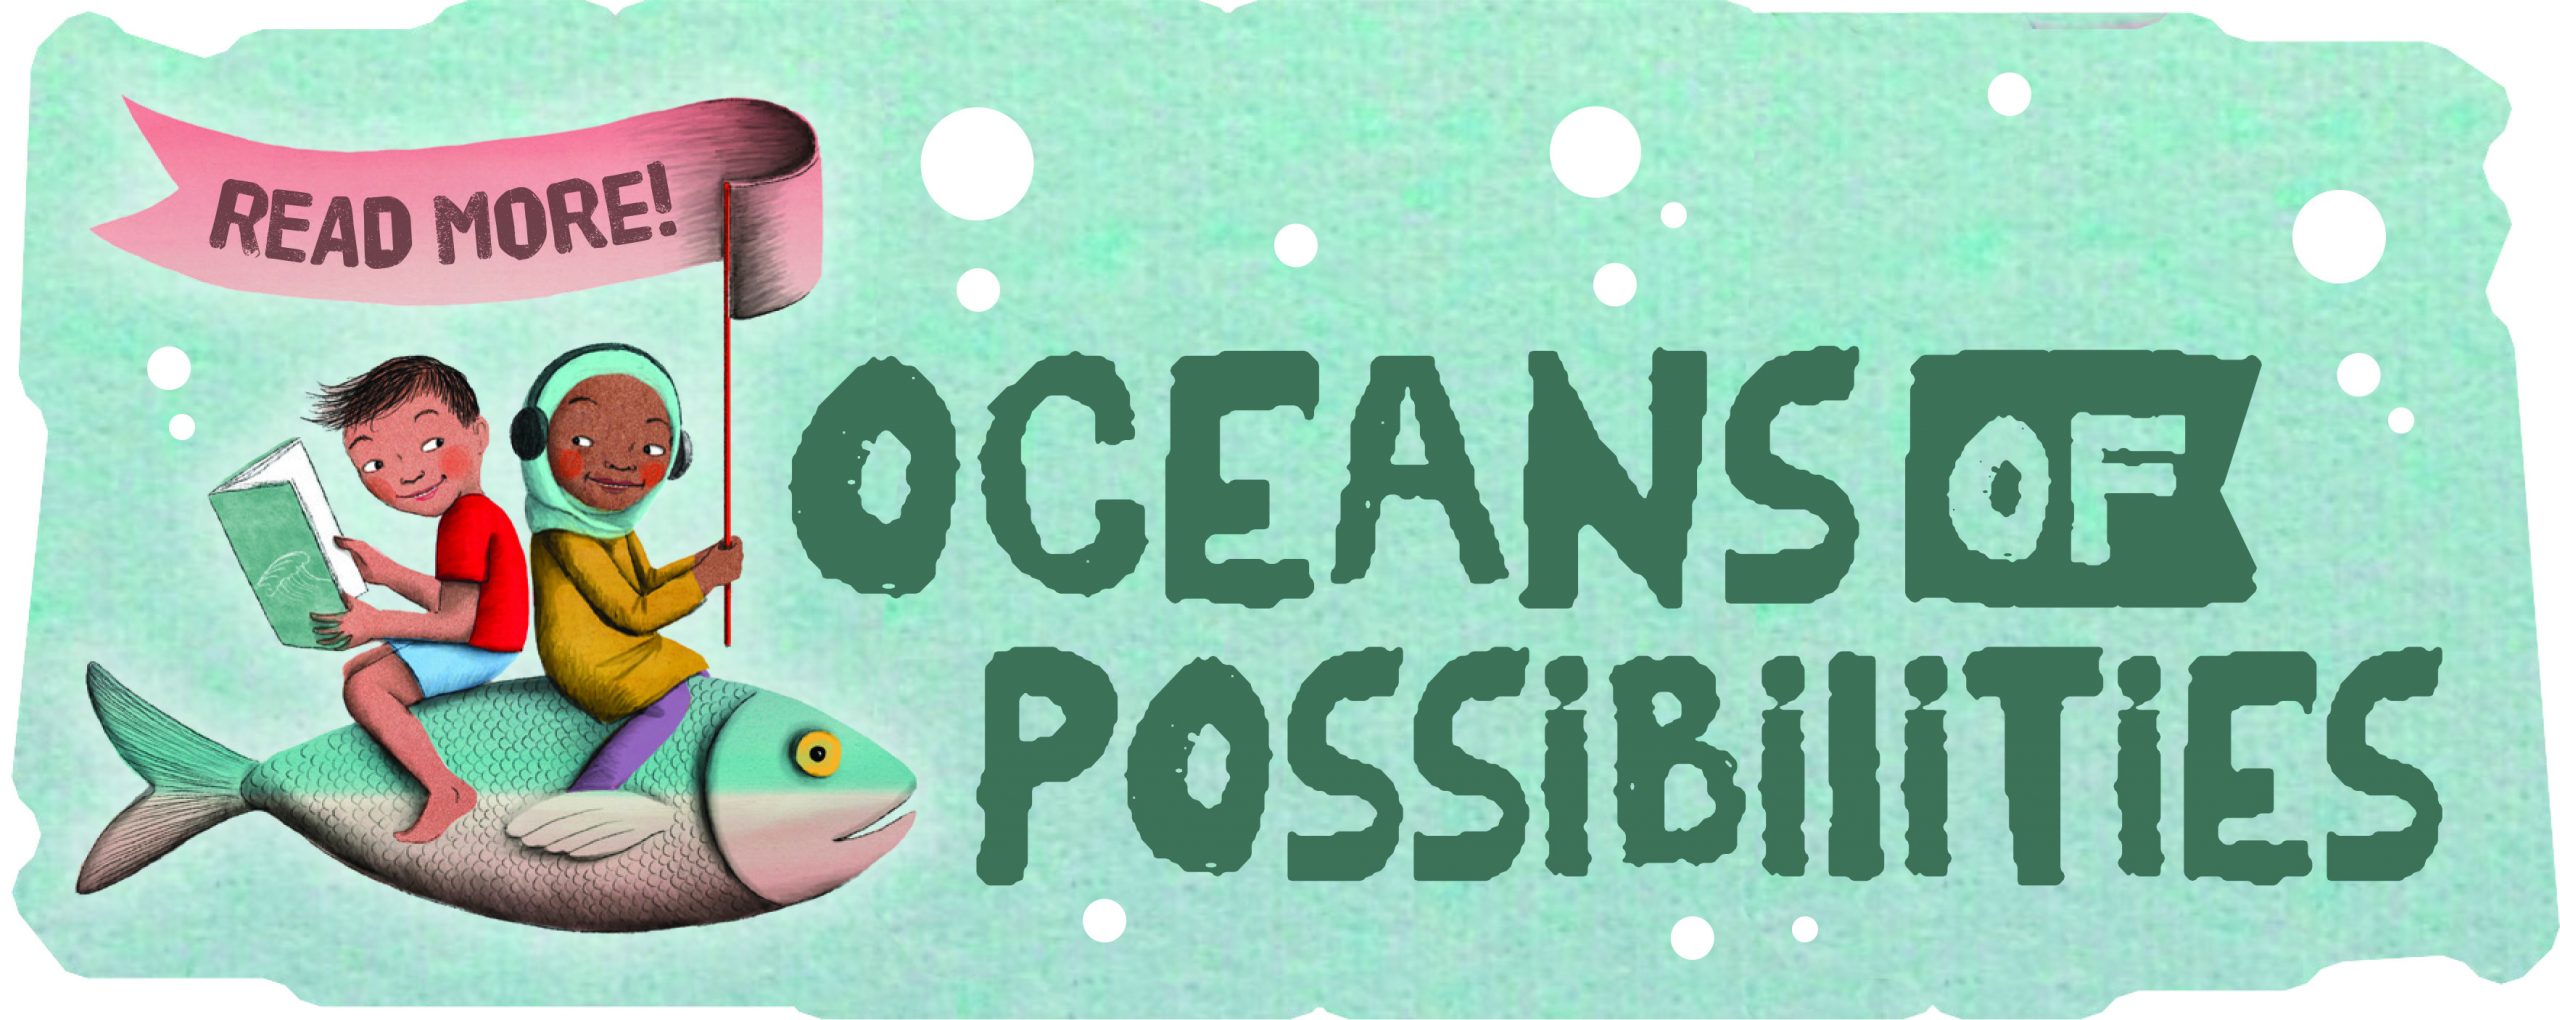 Oceans of Possibilities. Summer Reading Program 2022 thanks to CSLP.